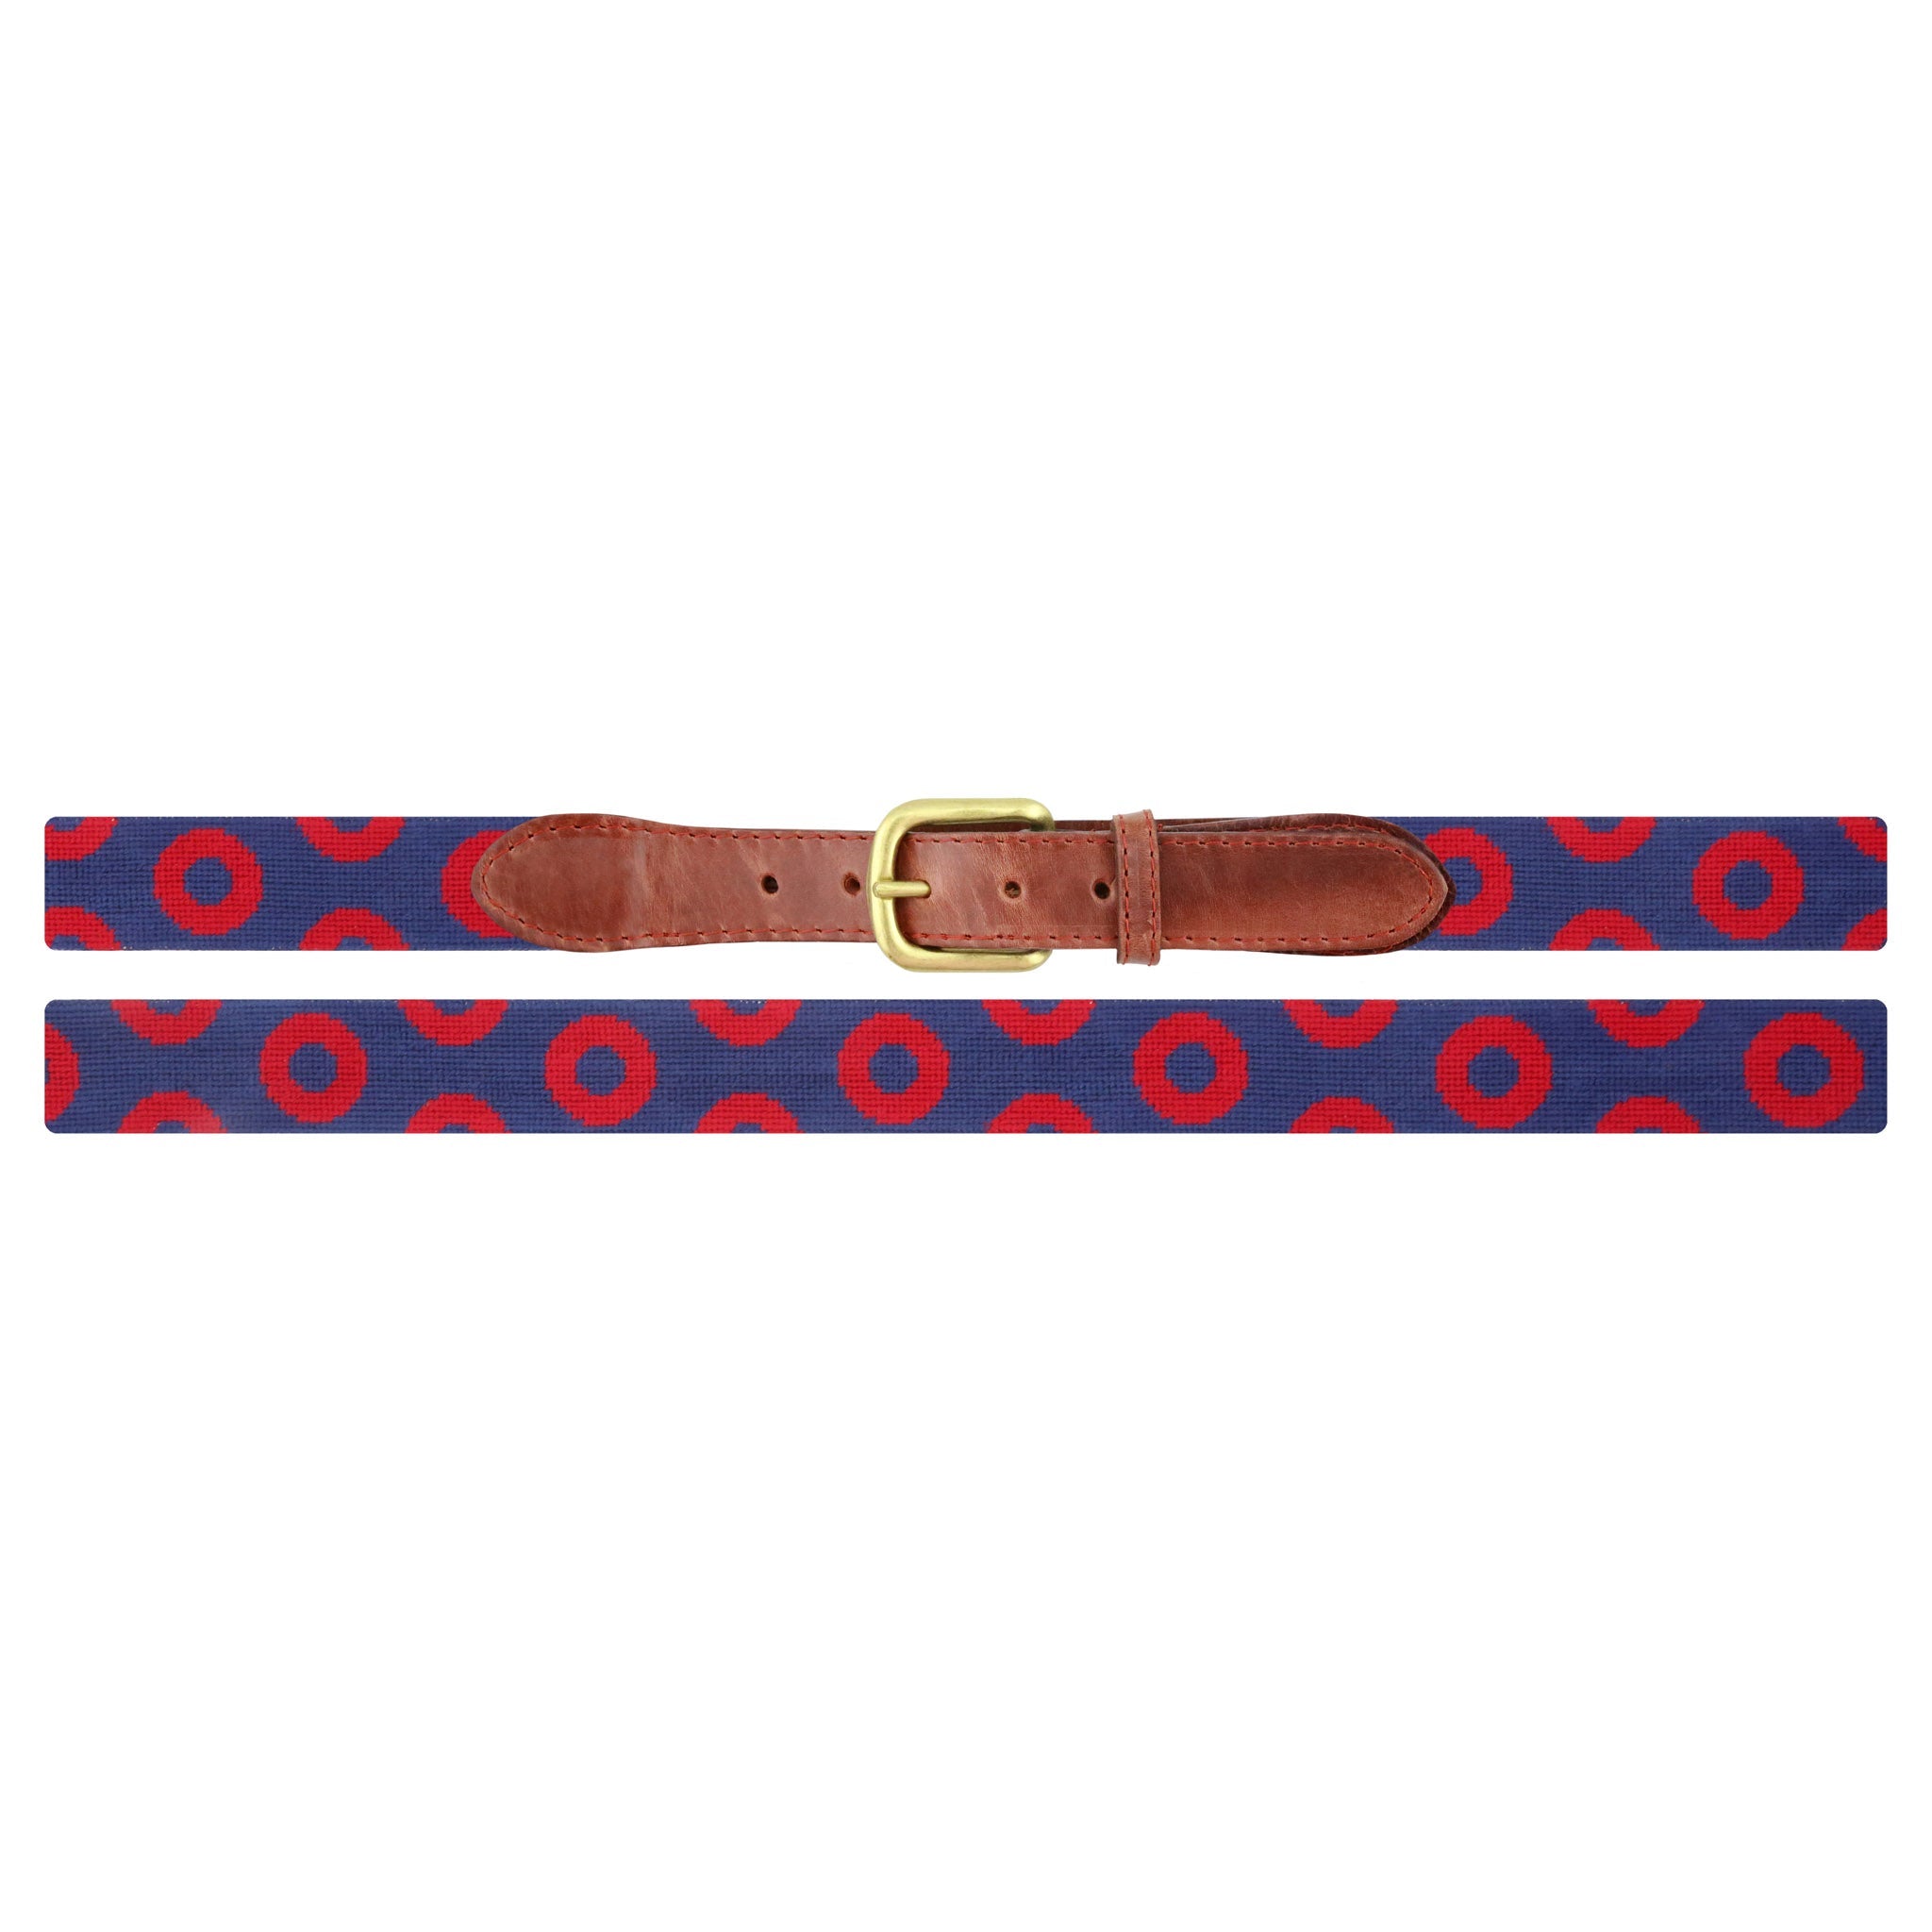 The Donut Pattern Belt (Classic Navy - Red Donuts) – Smathers & Branson